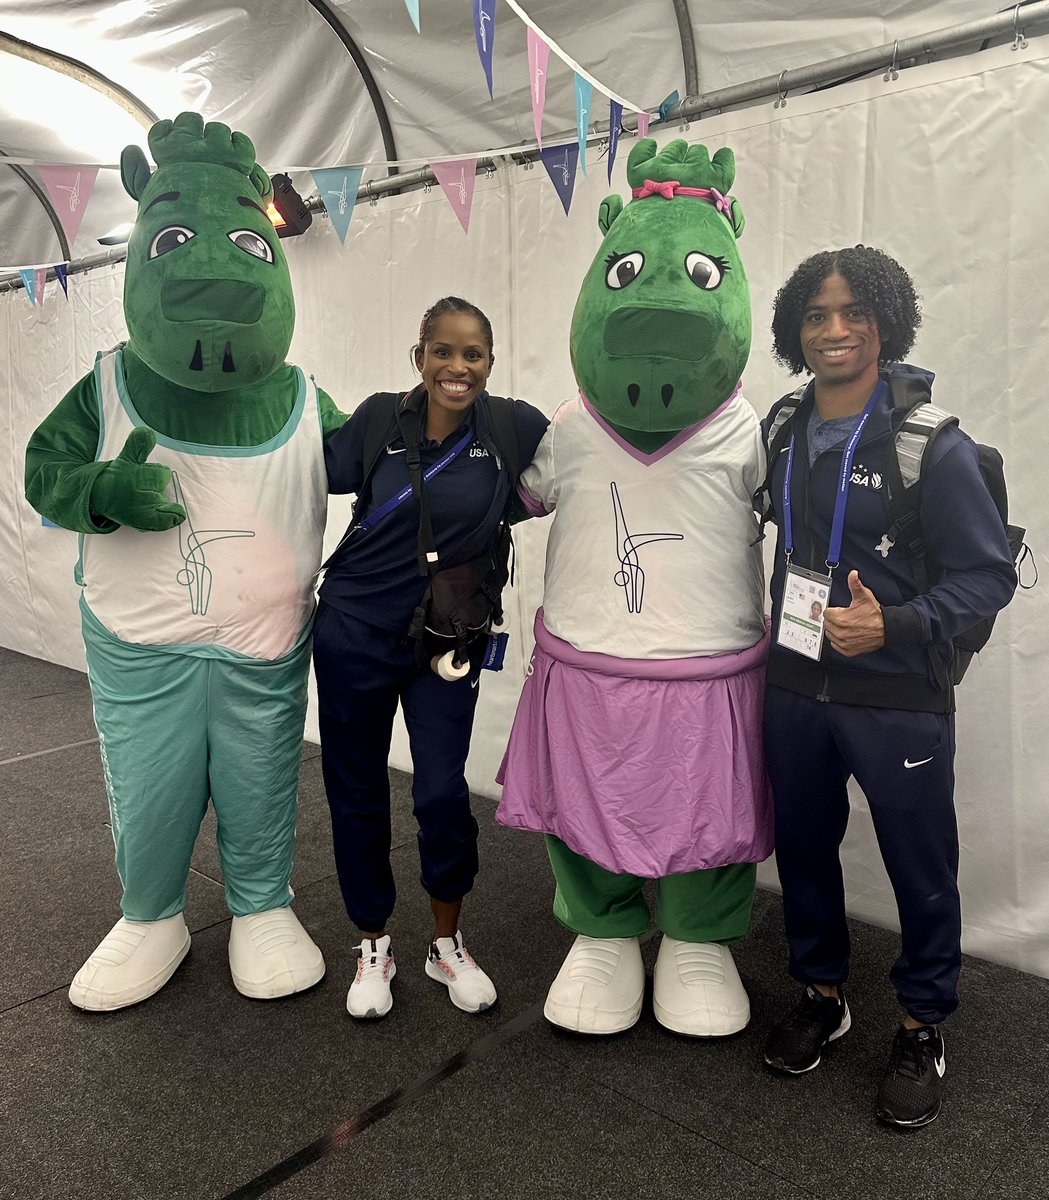 Proud of the work the @USAGym medical team is doing at #ARTWorlds2023! Not only are they providing great care for the athletes, but have been integral in discussions re: field of play medical response and gymnastics injury surveillance & reporting #teambehindtheteam